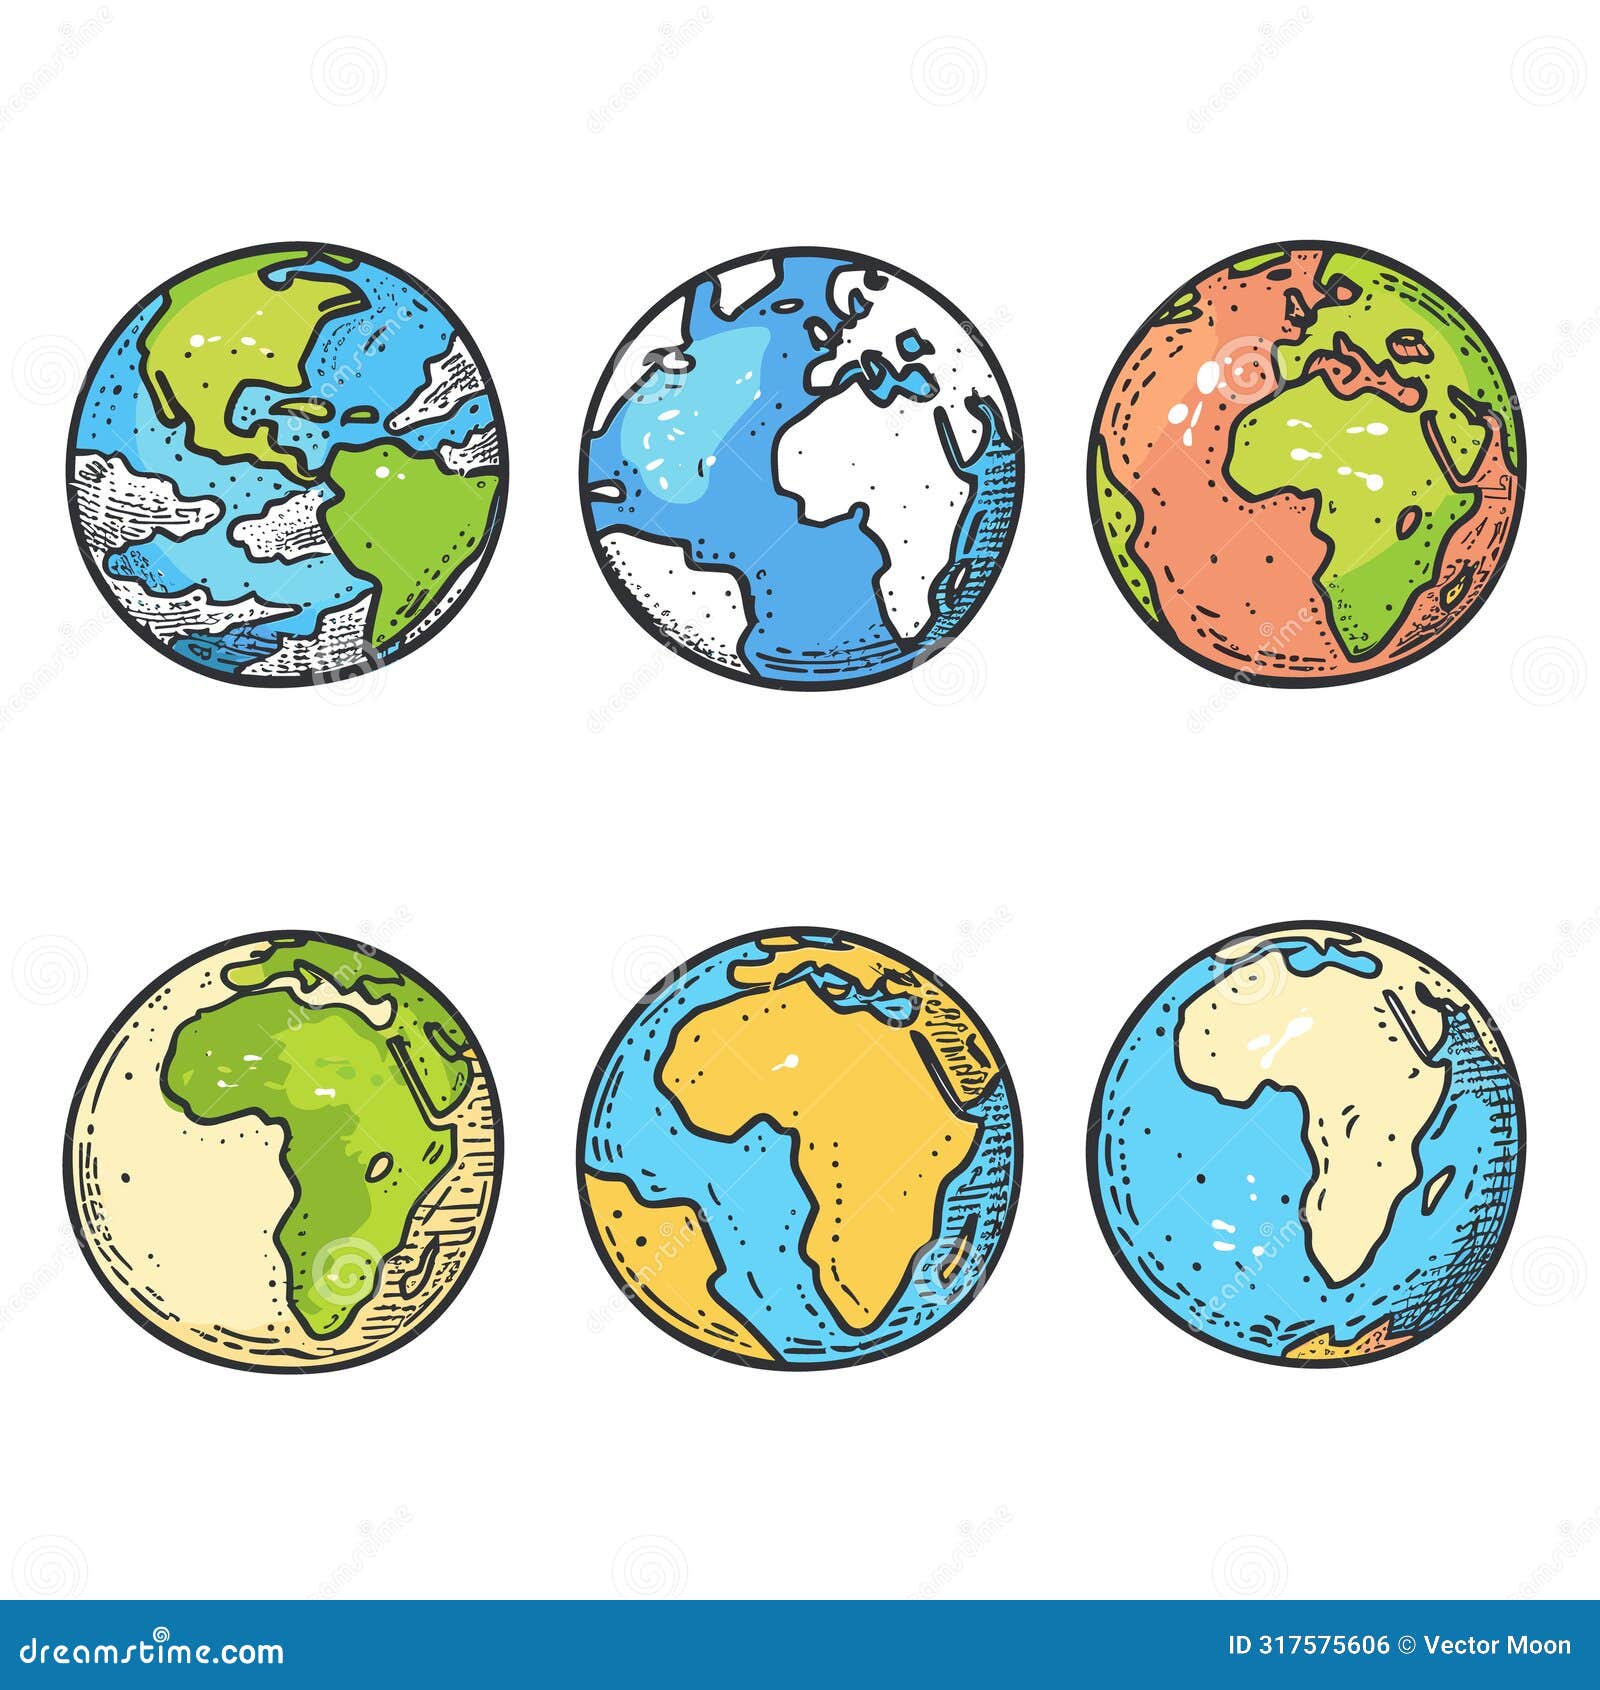 handdrawn globes showcasing various earth continents outlines colorful cartoon style. six